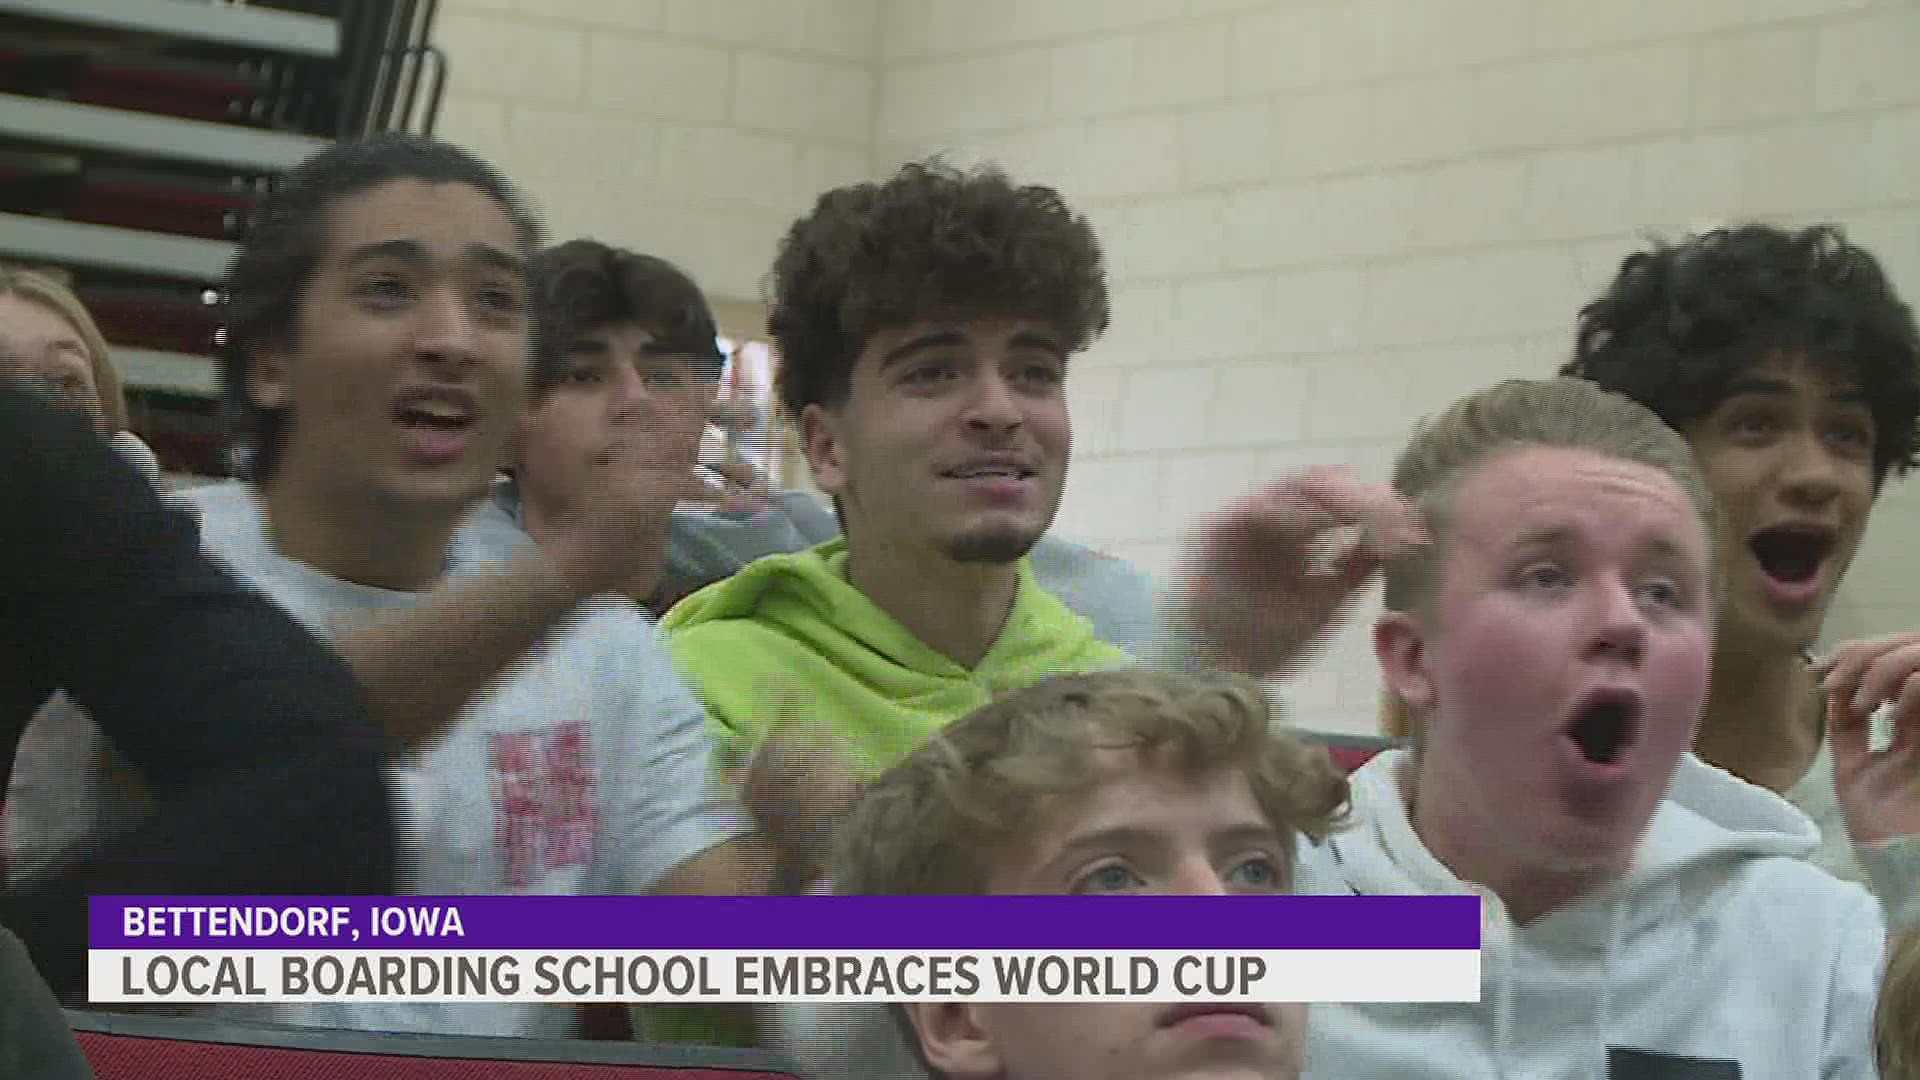 Rivermont Collegiate has 35 international students hailing from 15 different countries, all getting a chance to experience the World Cup together.